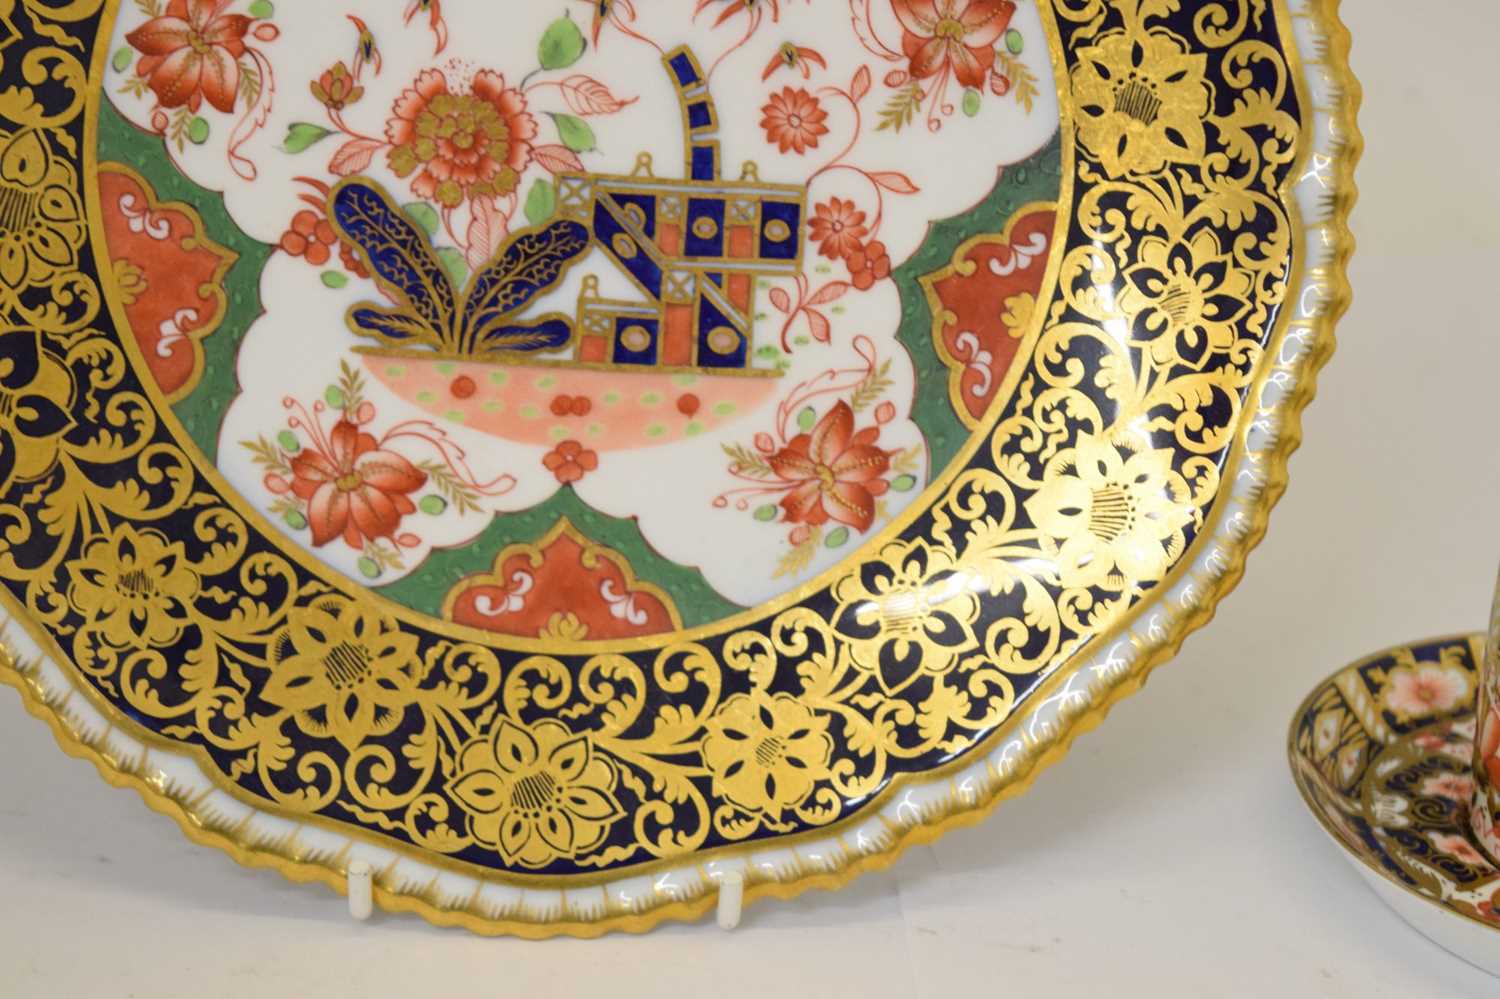 Royal Crown Derby coffee can and saucer, Copeland Spode plate - Image 6 of 9